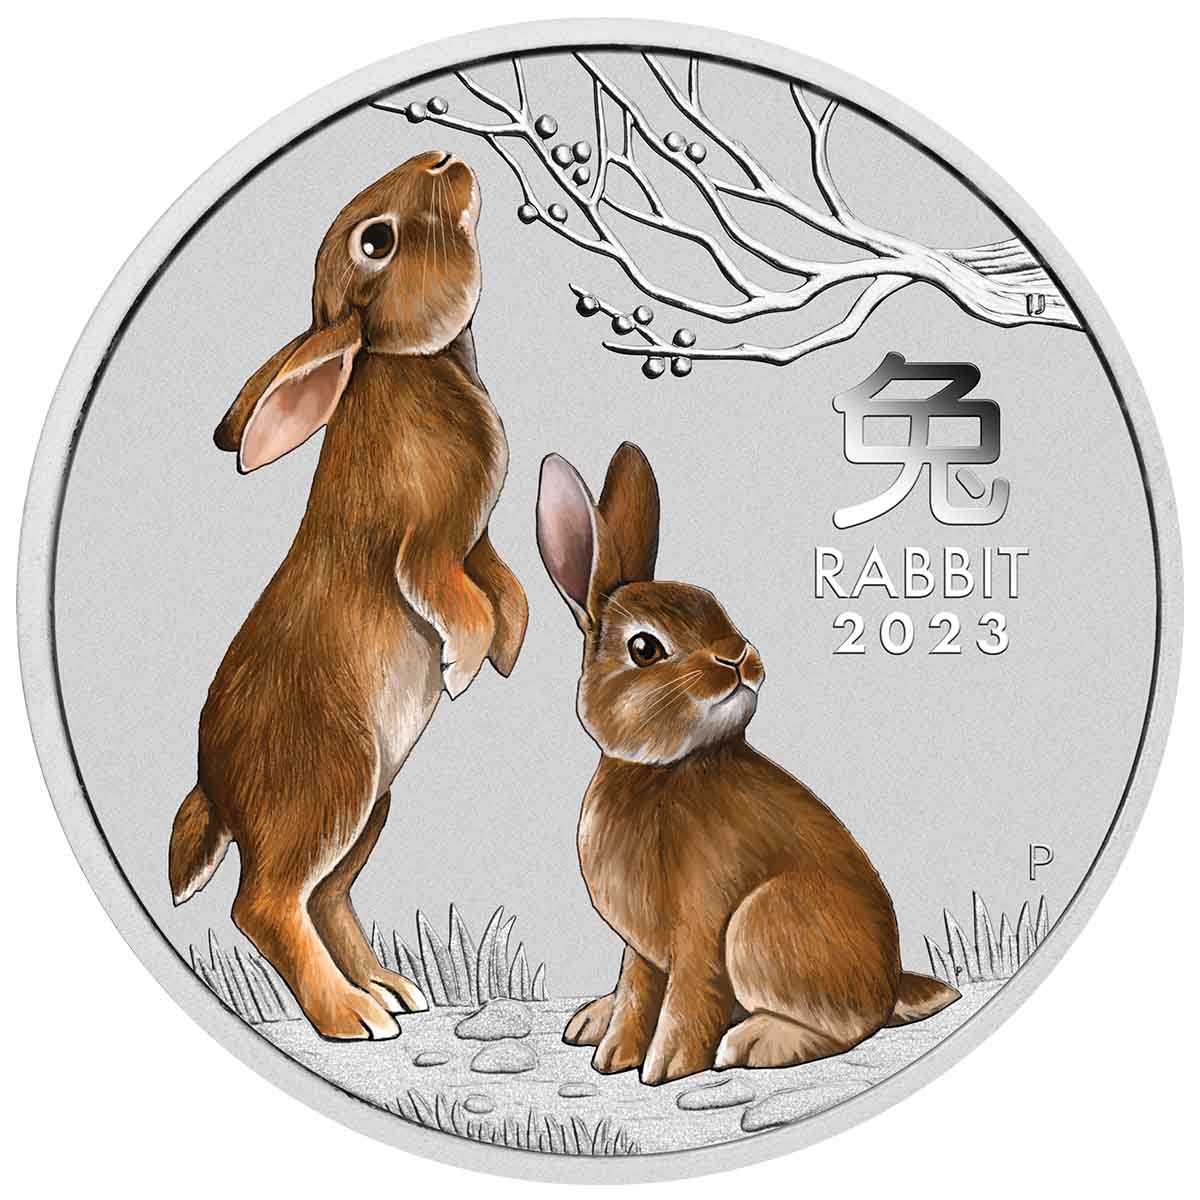 Sydney ANDA Money Expo 2023 25c Year of the Rabbit Colour Silver Brilliant Uncirculated Coin